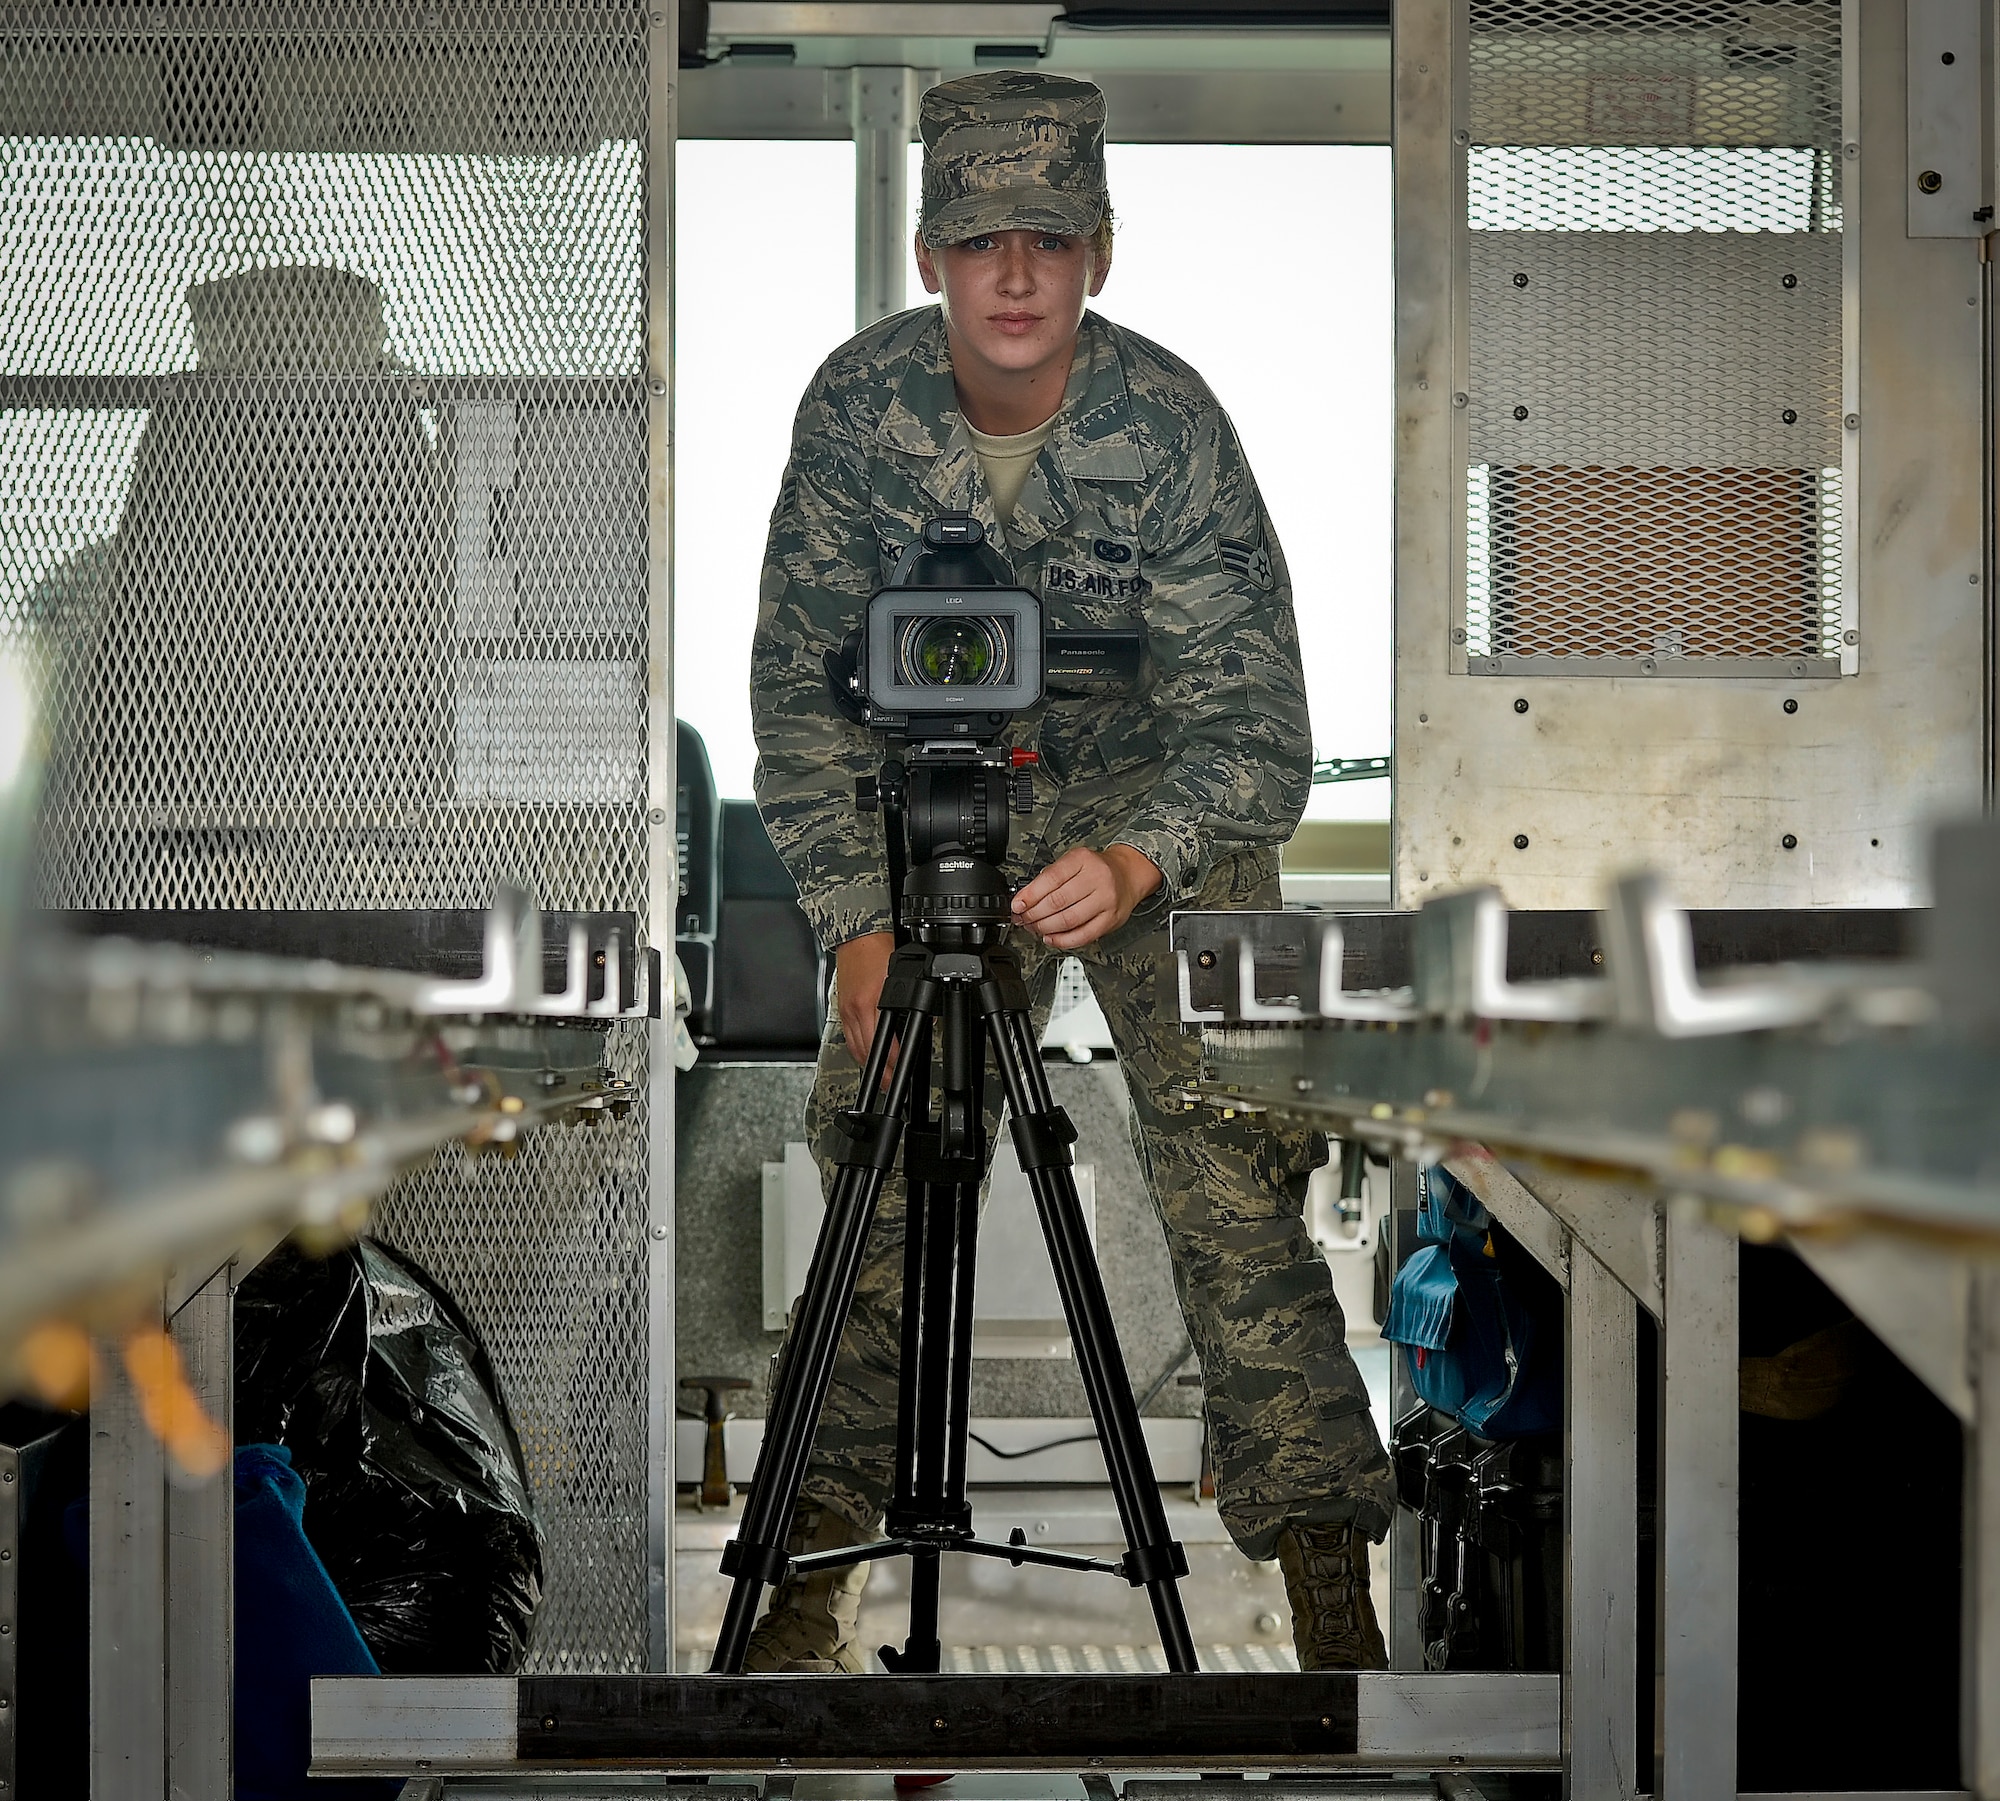 Senior Airman Laura Beckley, Air Force Mortuary Affairs Operations broadcaster, readies her equipment before a dignified transfer at Dover Air Force Base, Del., on August 22, 2013. Back in July, Beckley was deployed to Dover to assume the roles as a member of the AFMAO documentation team. (U.S. Air Force Photo by David Tucker/Released)